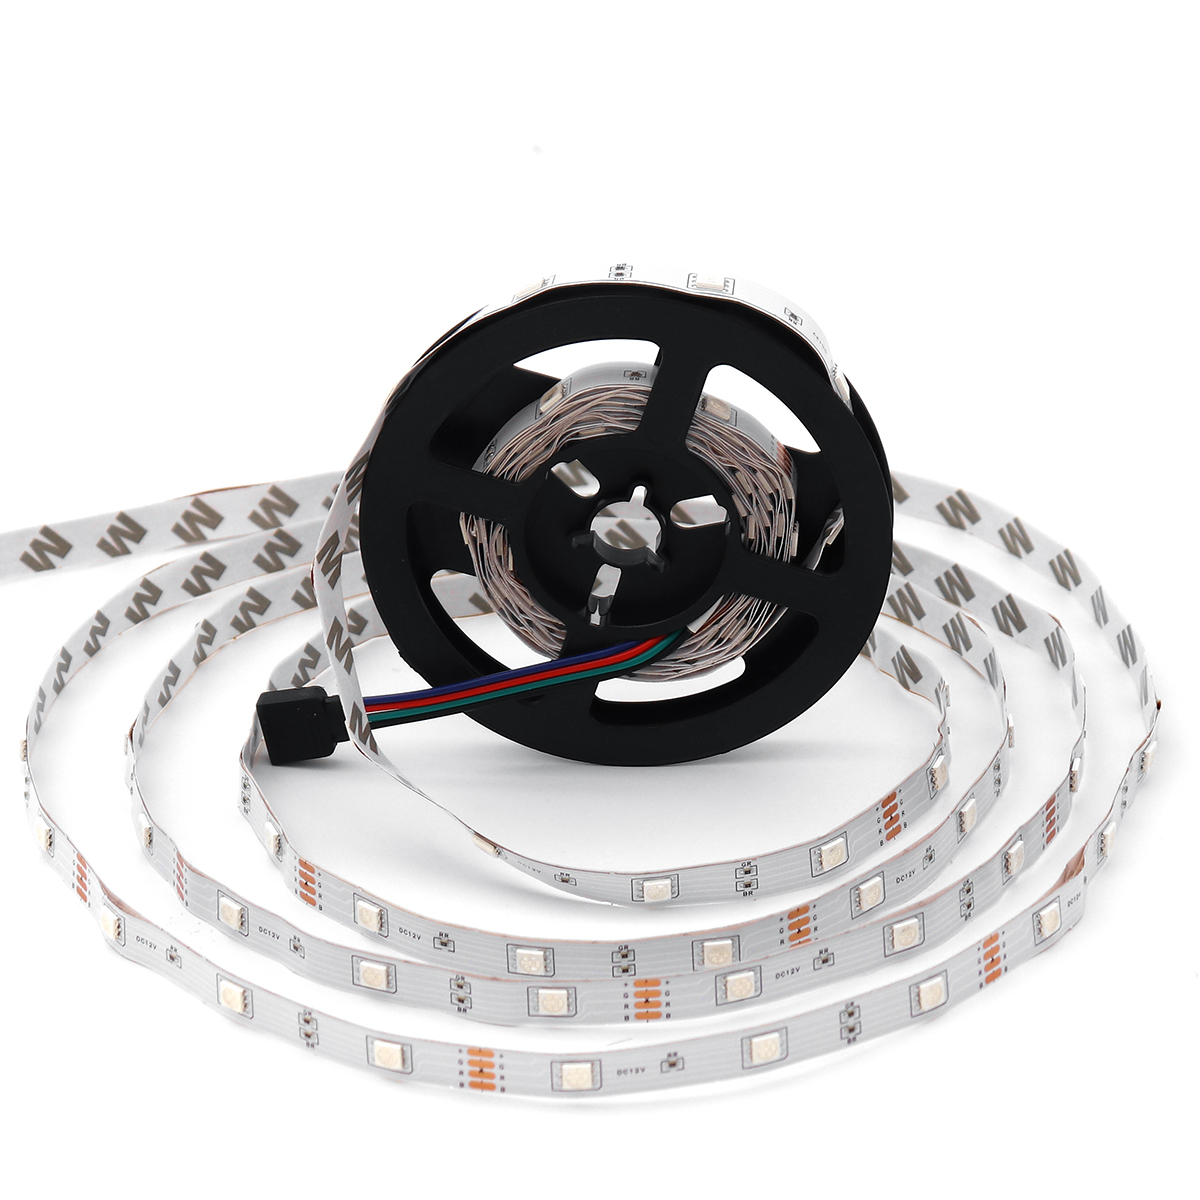 5M-DC12V-LED-Strip-Light-5050-RGB-Rope-Flexible-Changing-Lamp-with-Remote-Control-for-TV-Bedroom-Par-1618778-3